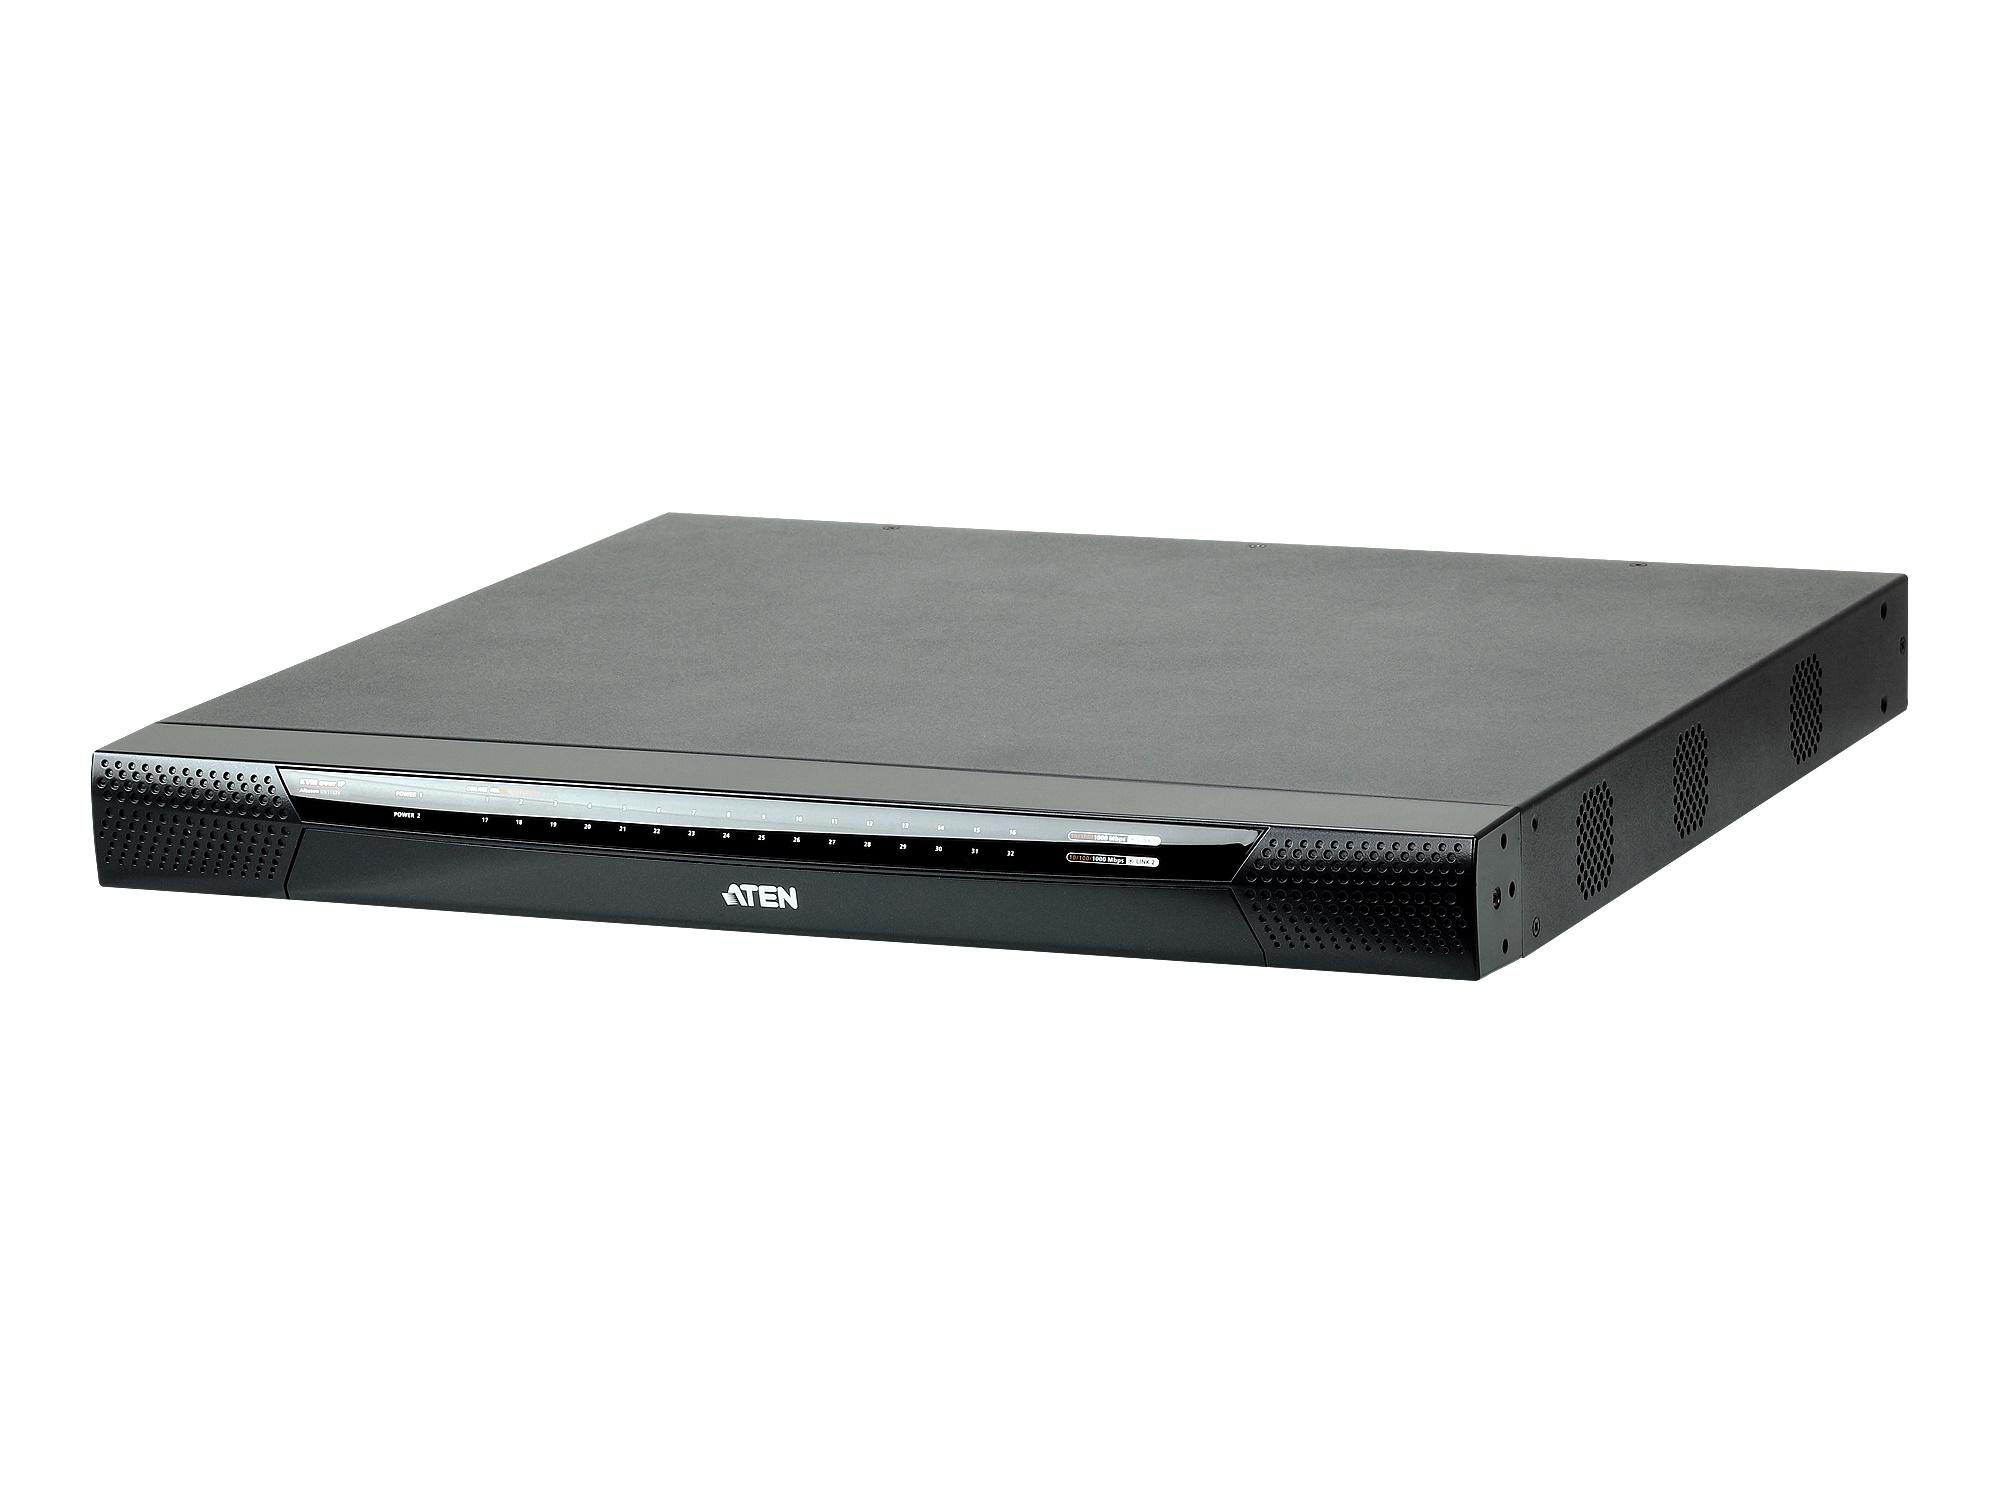 KN1132V 1-Local/1-Remote Access 32-Port Cat 5 KVM over IP Switch with Virtual Media/1920x1200 by Aten